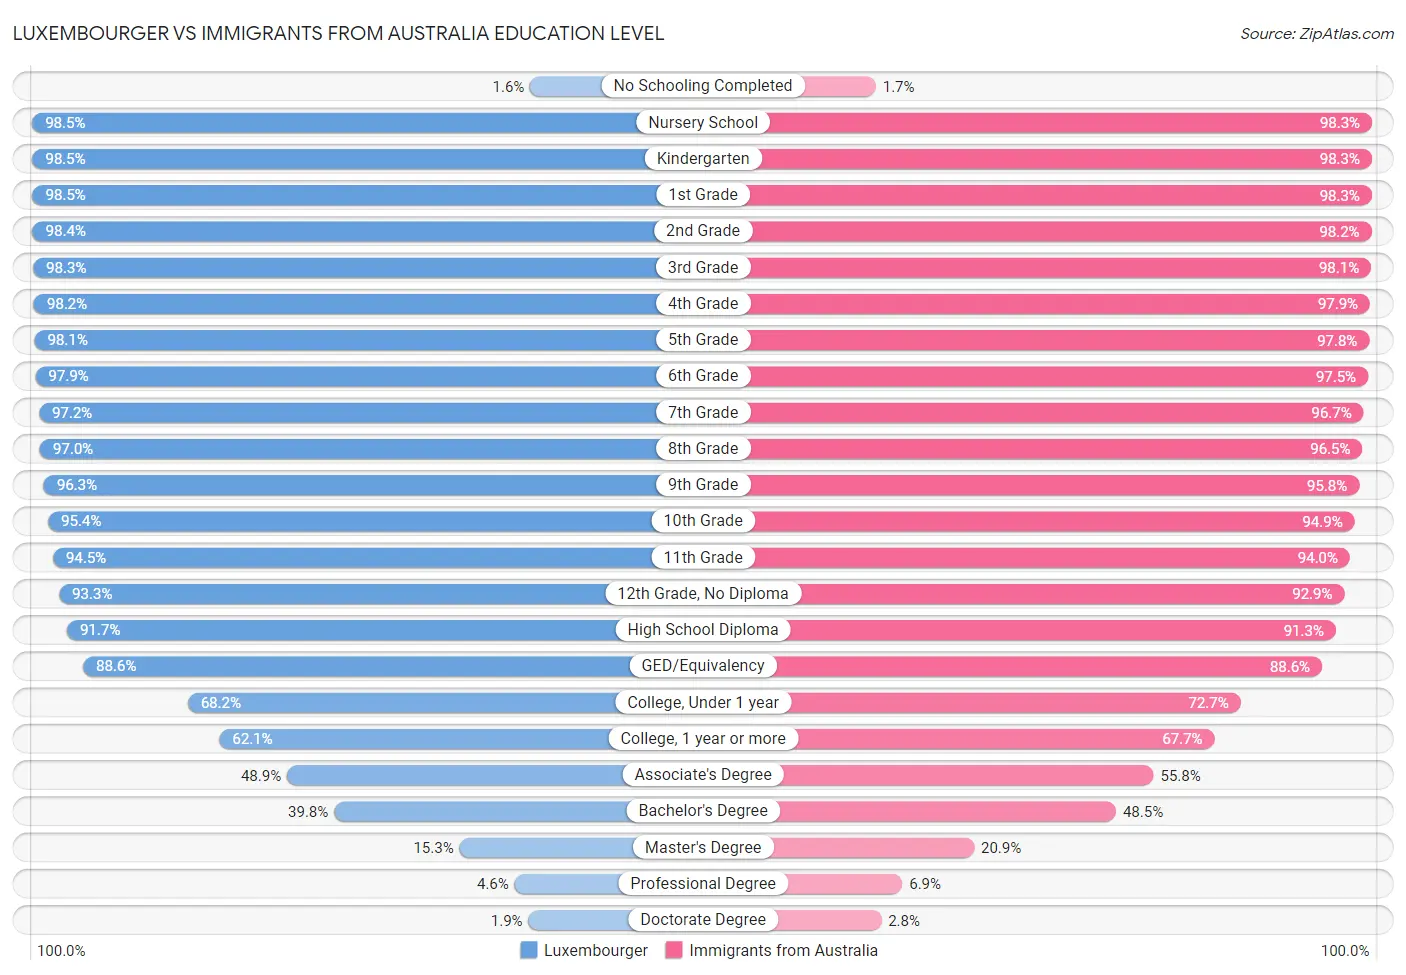 Luxembourger vs Immigrants from Australia Education Level